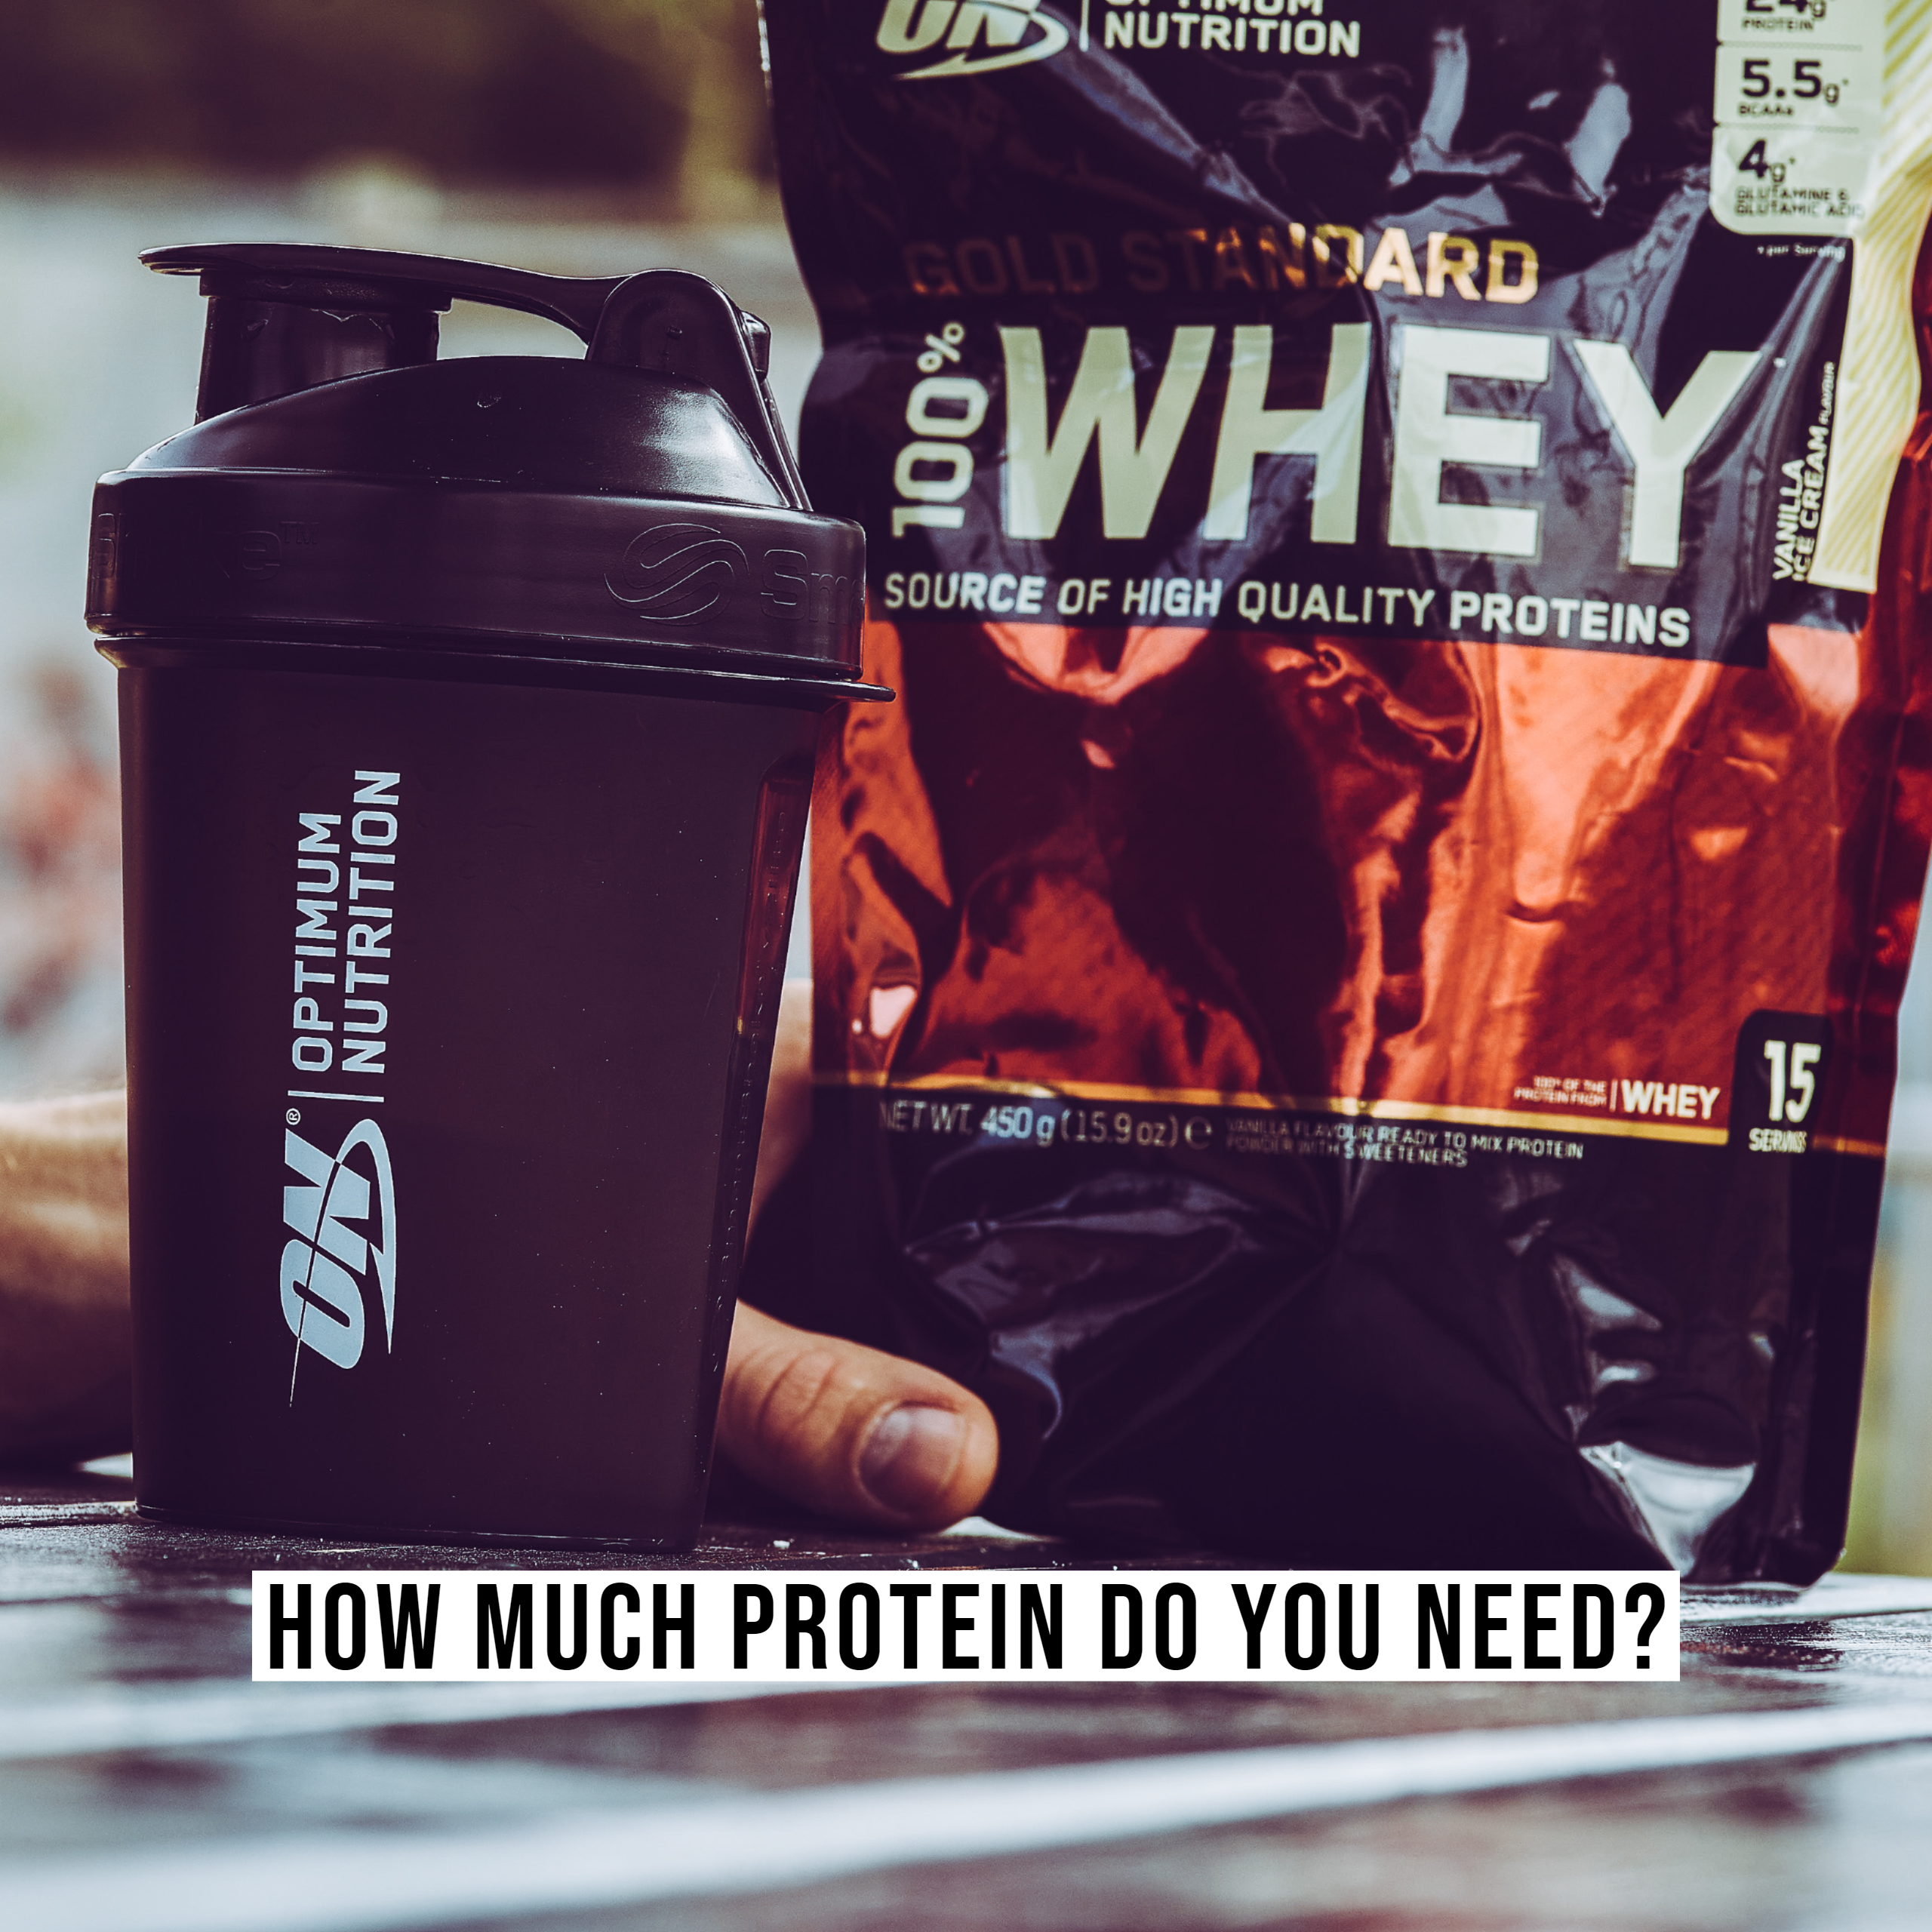 HOW MUCH PROTEIN SHOULD I EAT?